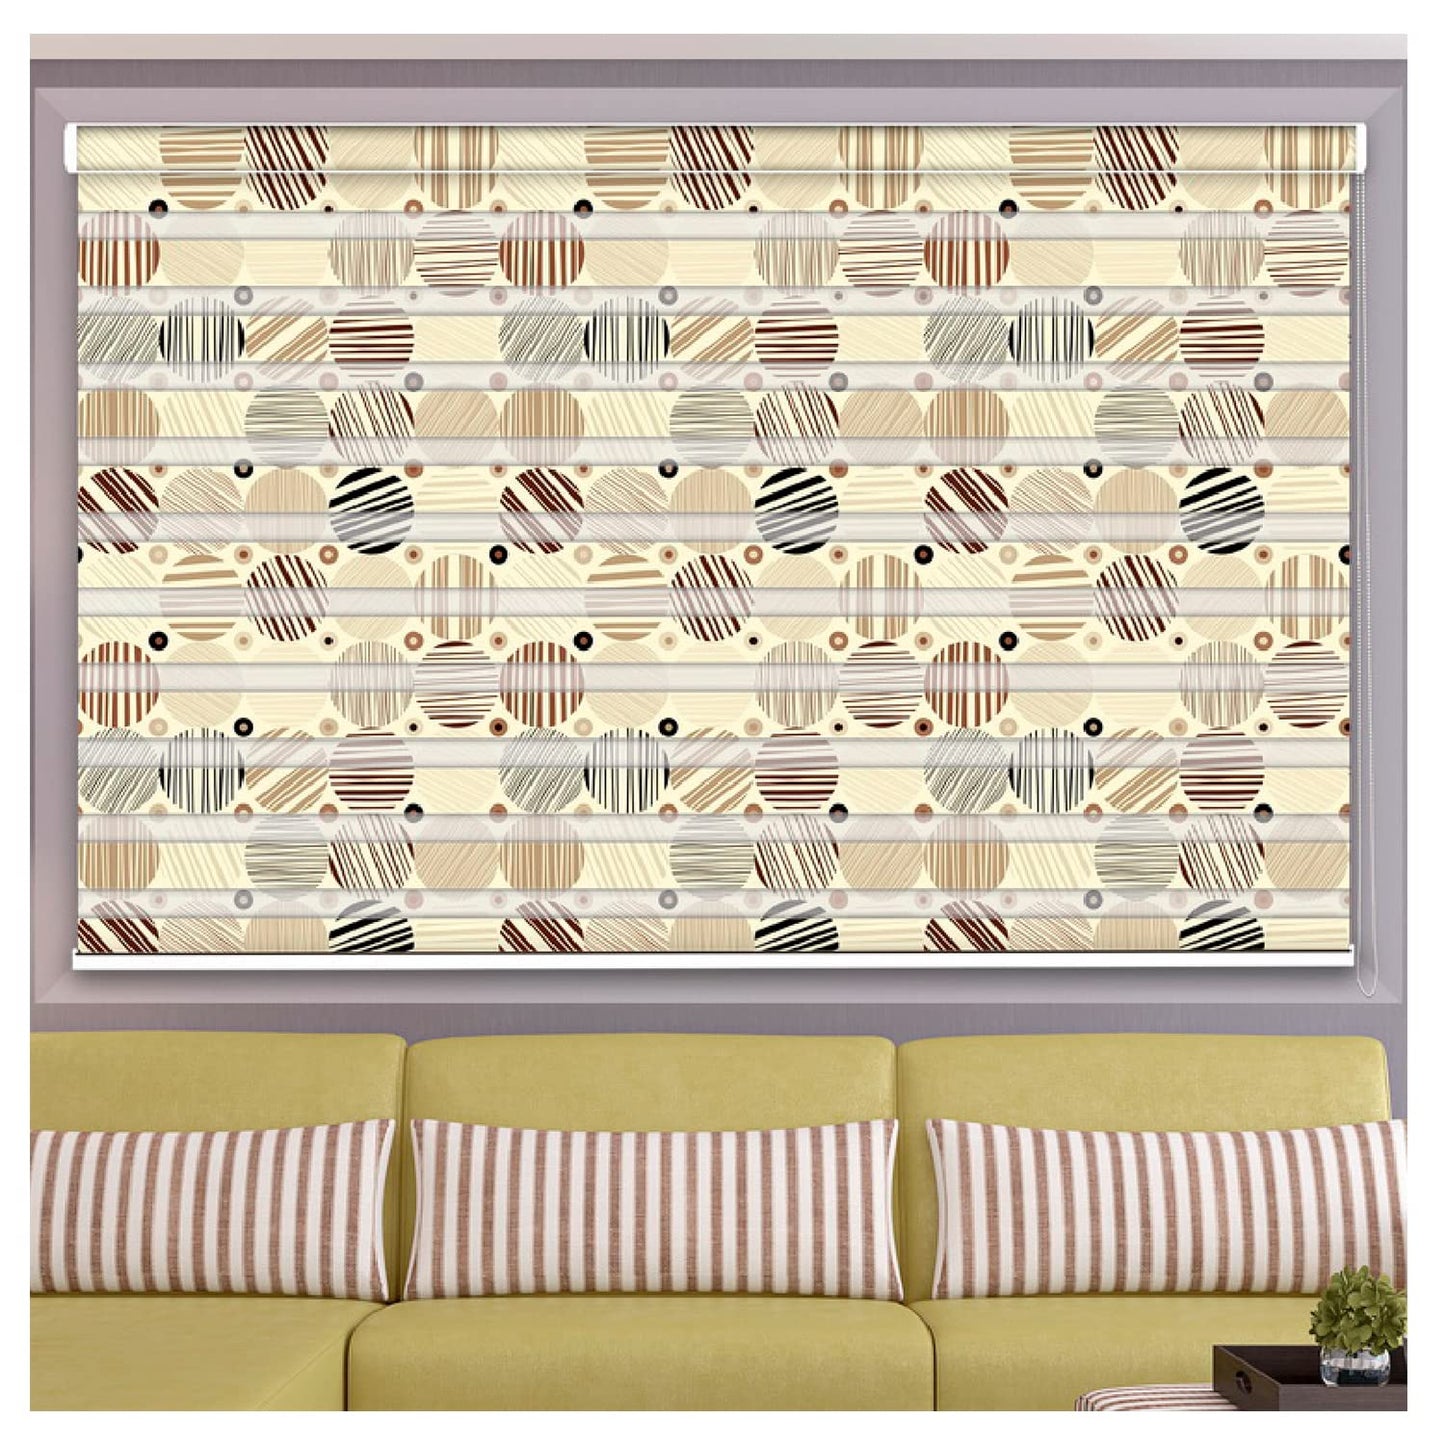 Zebra Blinds for Windows and Doors with Dual Shade, Horizontal Stripes, Blinds for Home & Office (Customized Size, Round Ball Design)